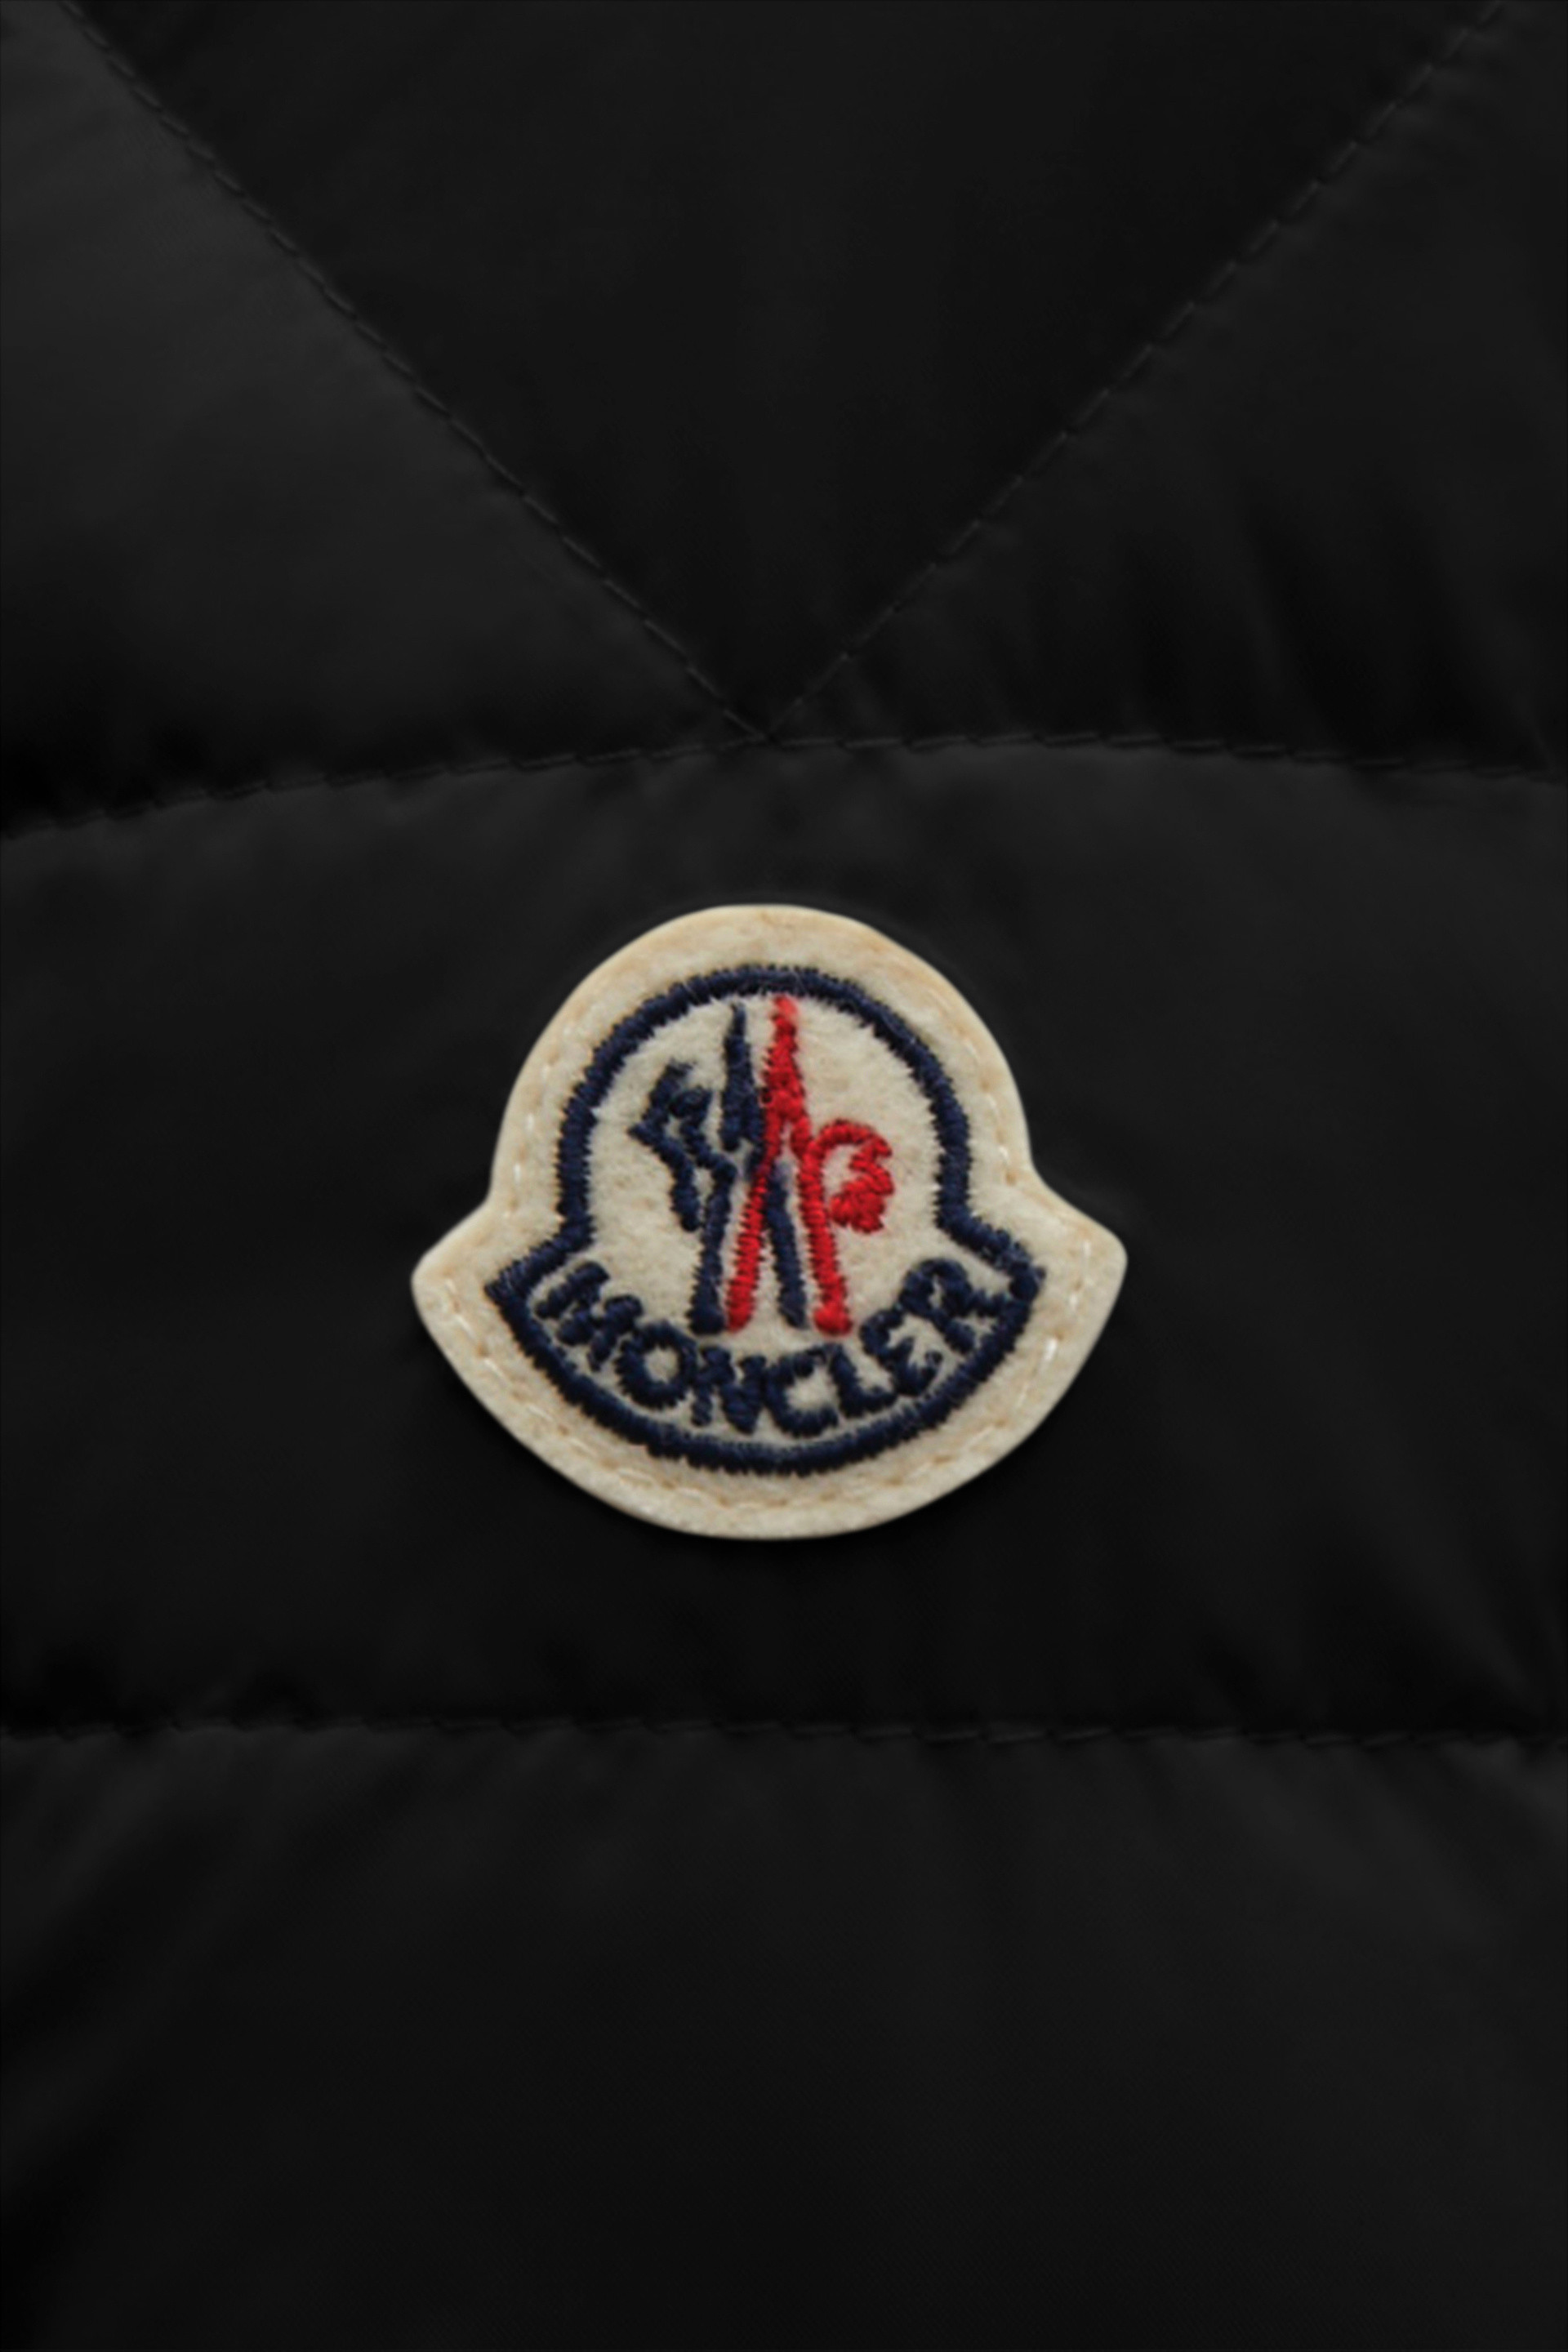 Jackets for Boys - Down Jackets & Leather Jackets | Moncler US